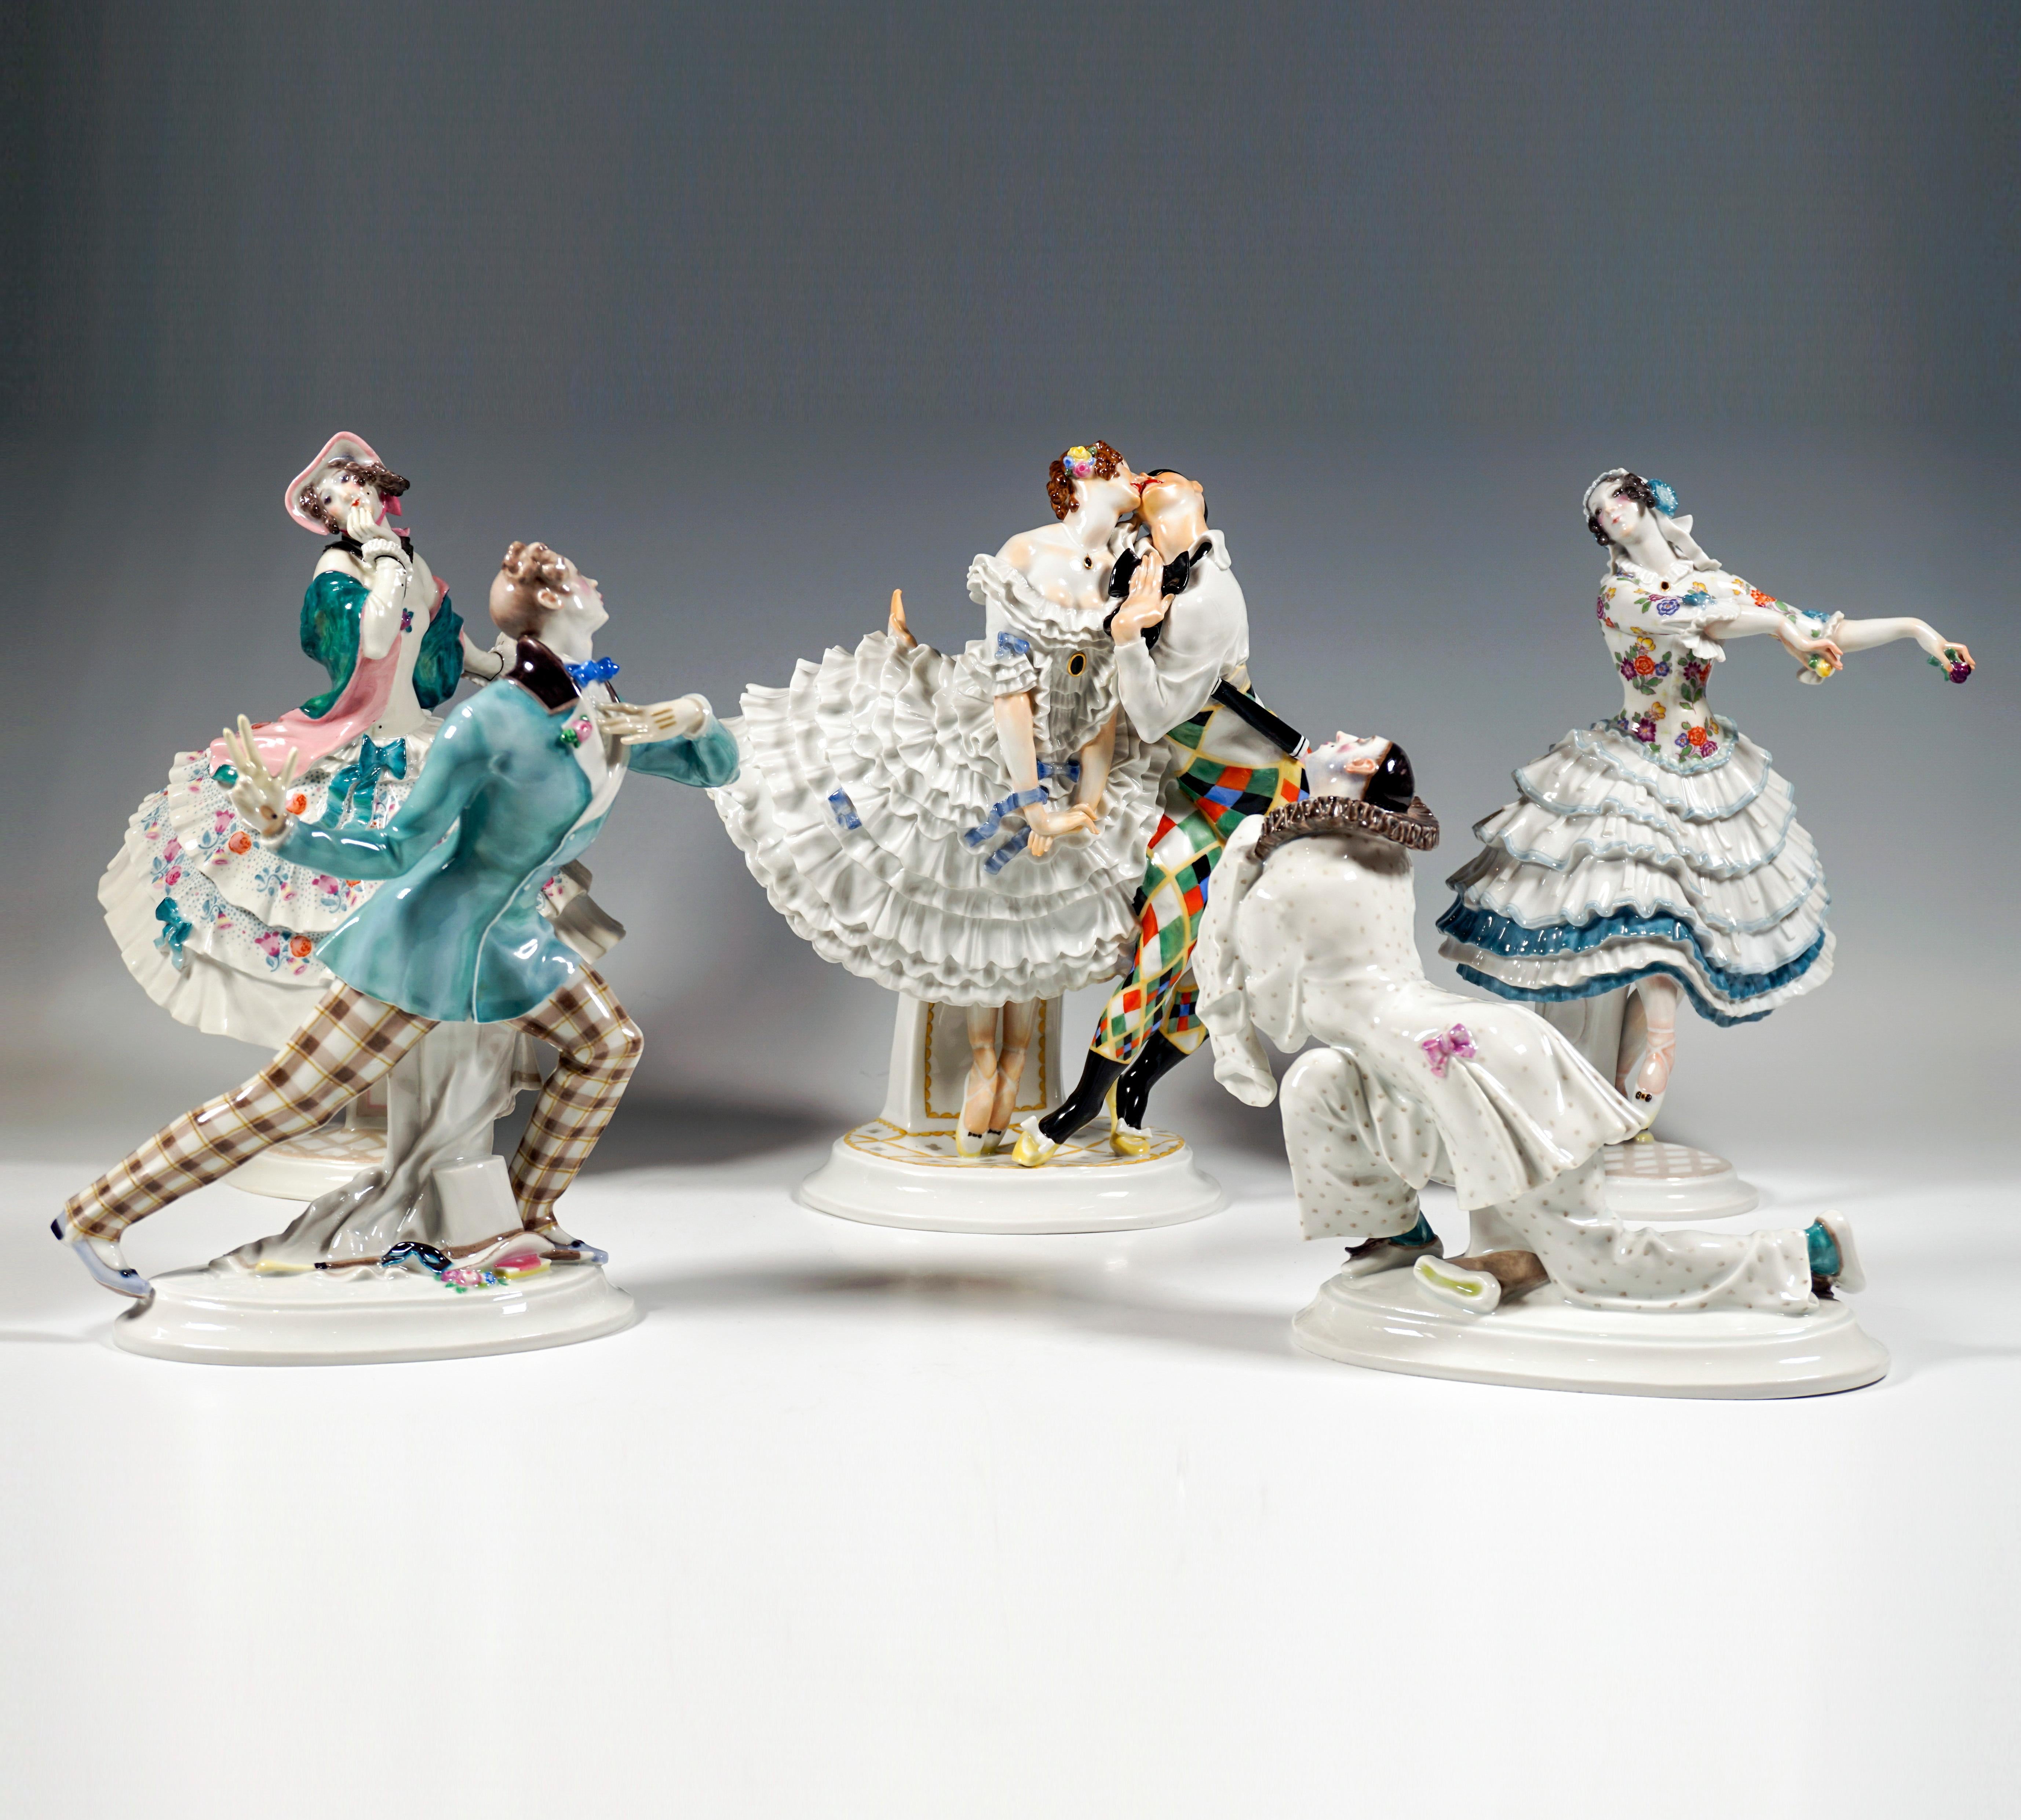 Set of finest Meissen Porcelain Figures:

'HARLEKIN & COLUMBINE'
Dancing couple depicting the figures of the Harlequin and the Columbine: Dancer balancing on her toes in an elaborate crinoline dress with a plunging neckline, her hair artfully pinned